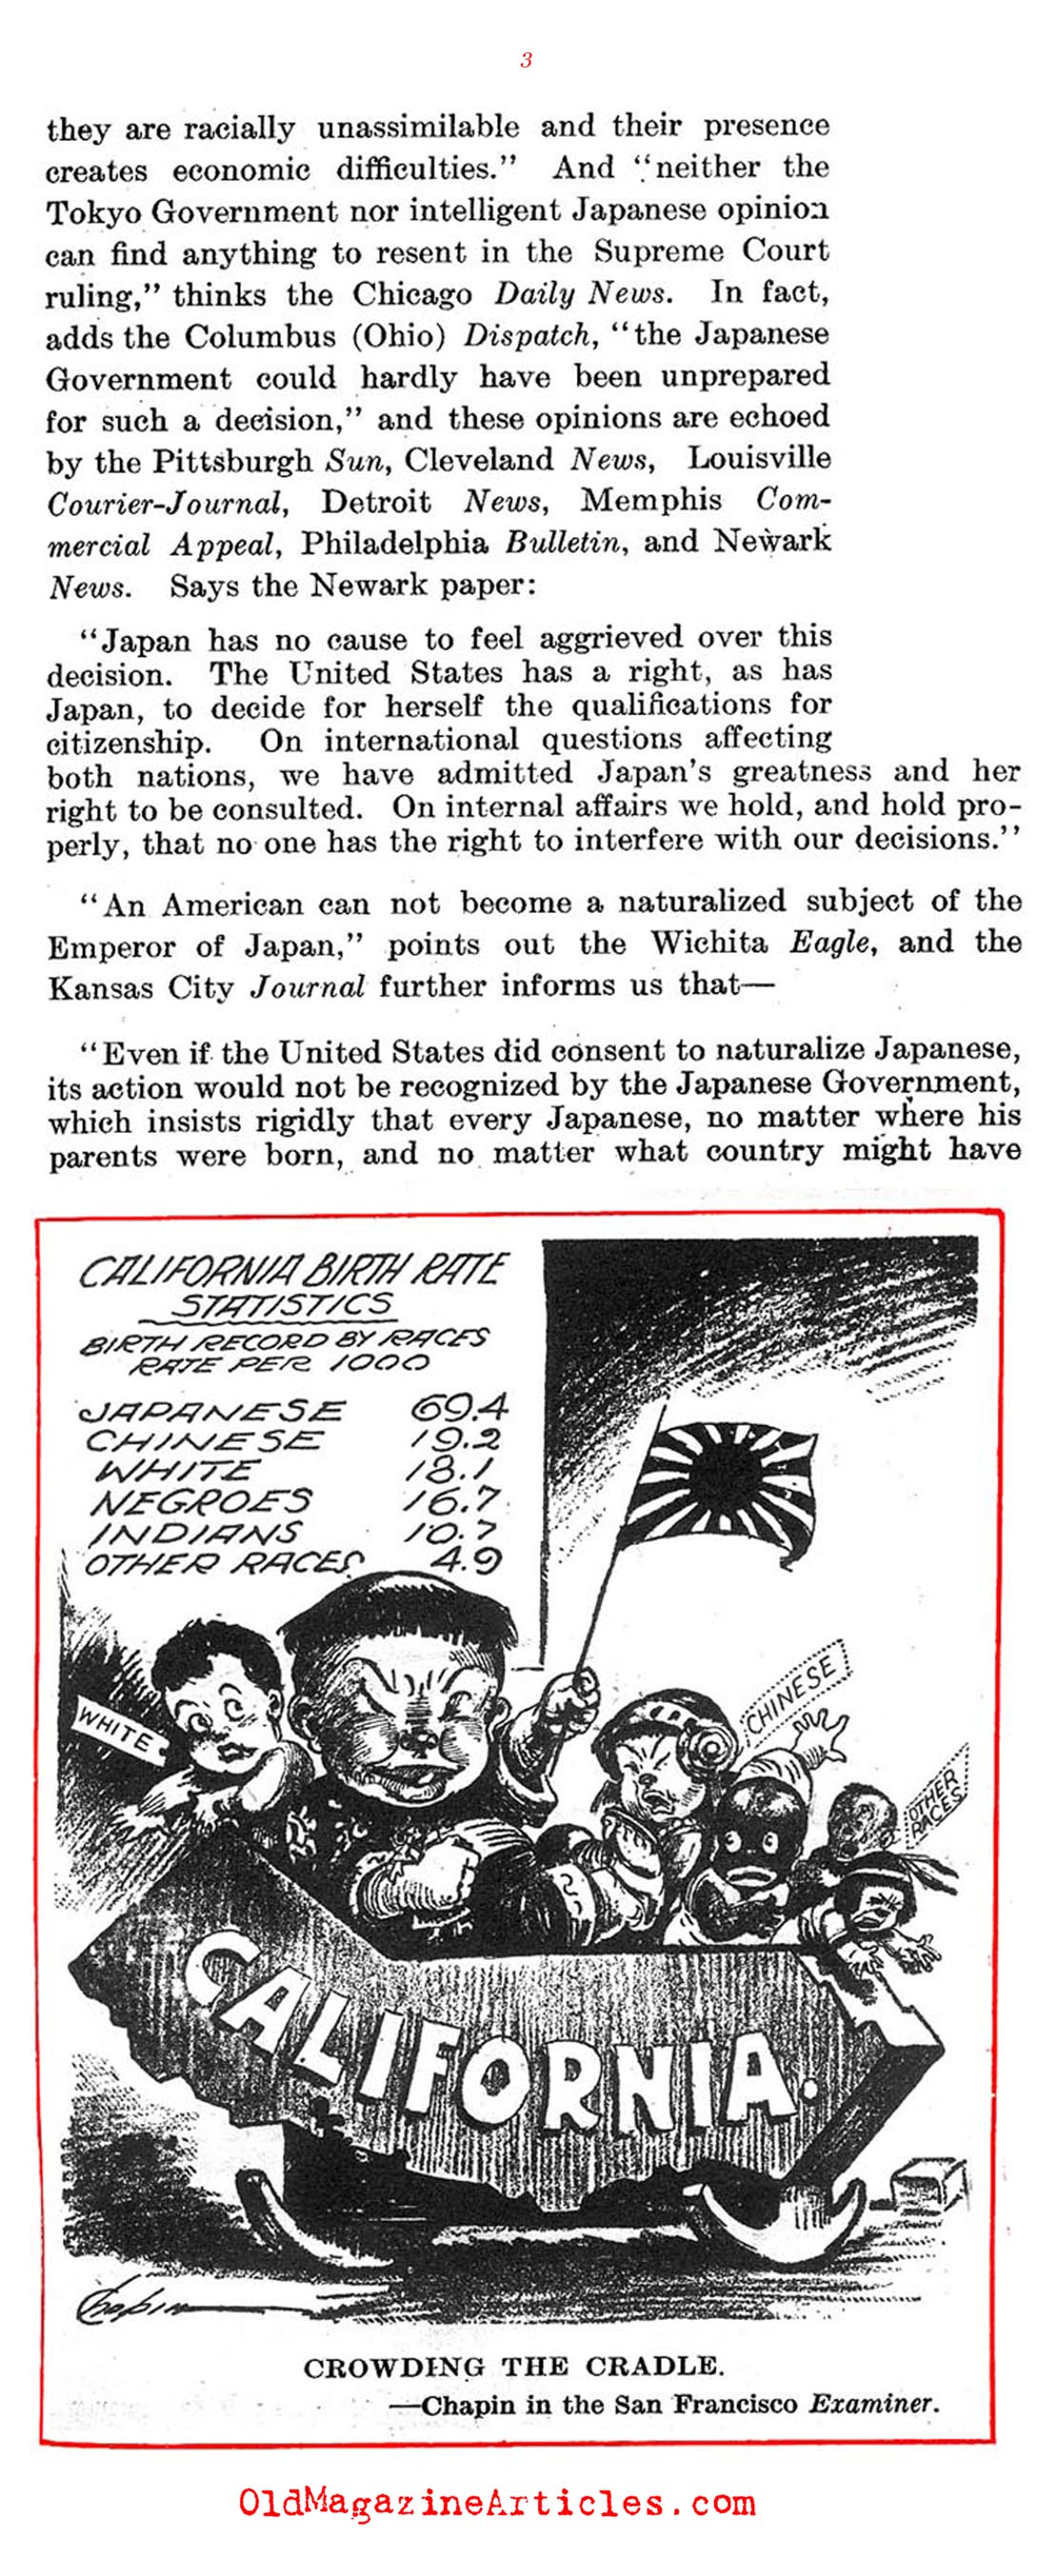 No Citizenship for Japanese Immigrants (Literary Digest, 1922)